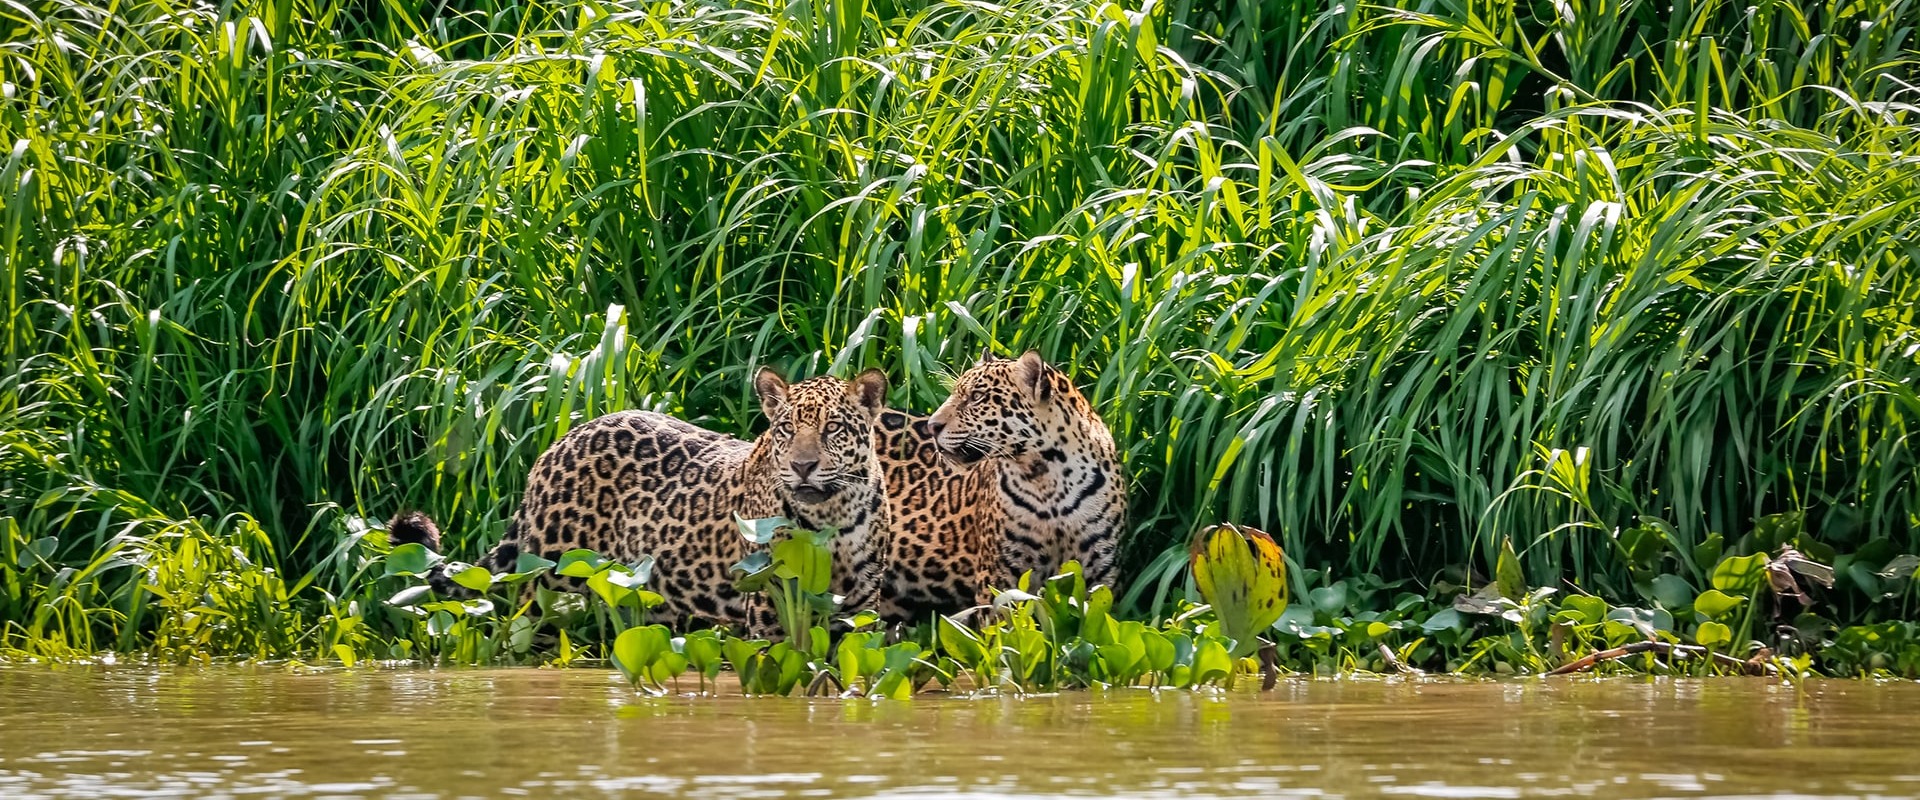 Two Jaguars in the forests of Brazil, by Uwe Bergwitz